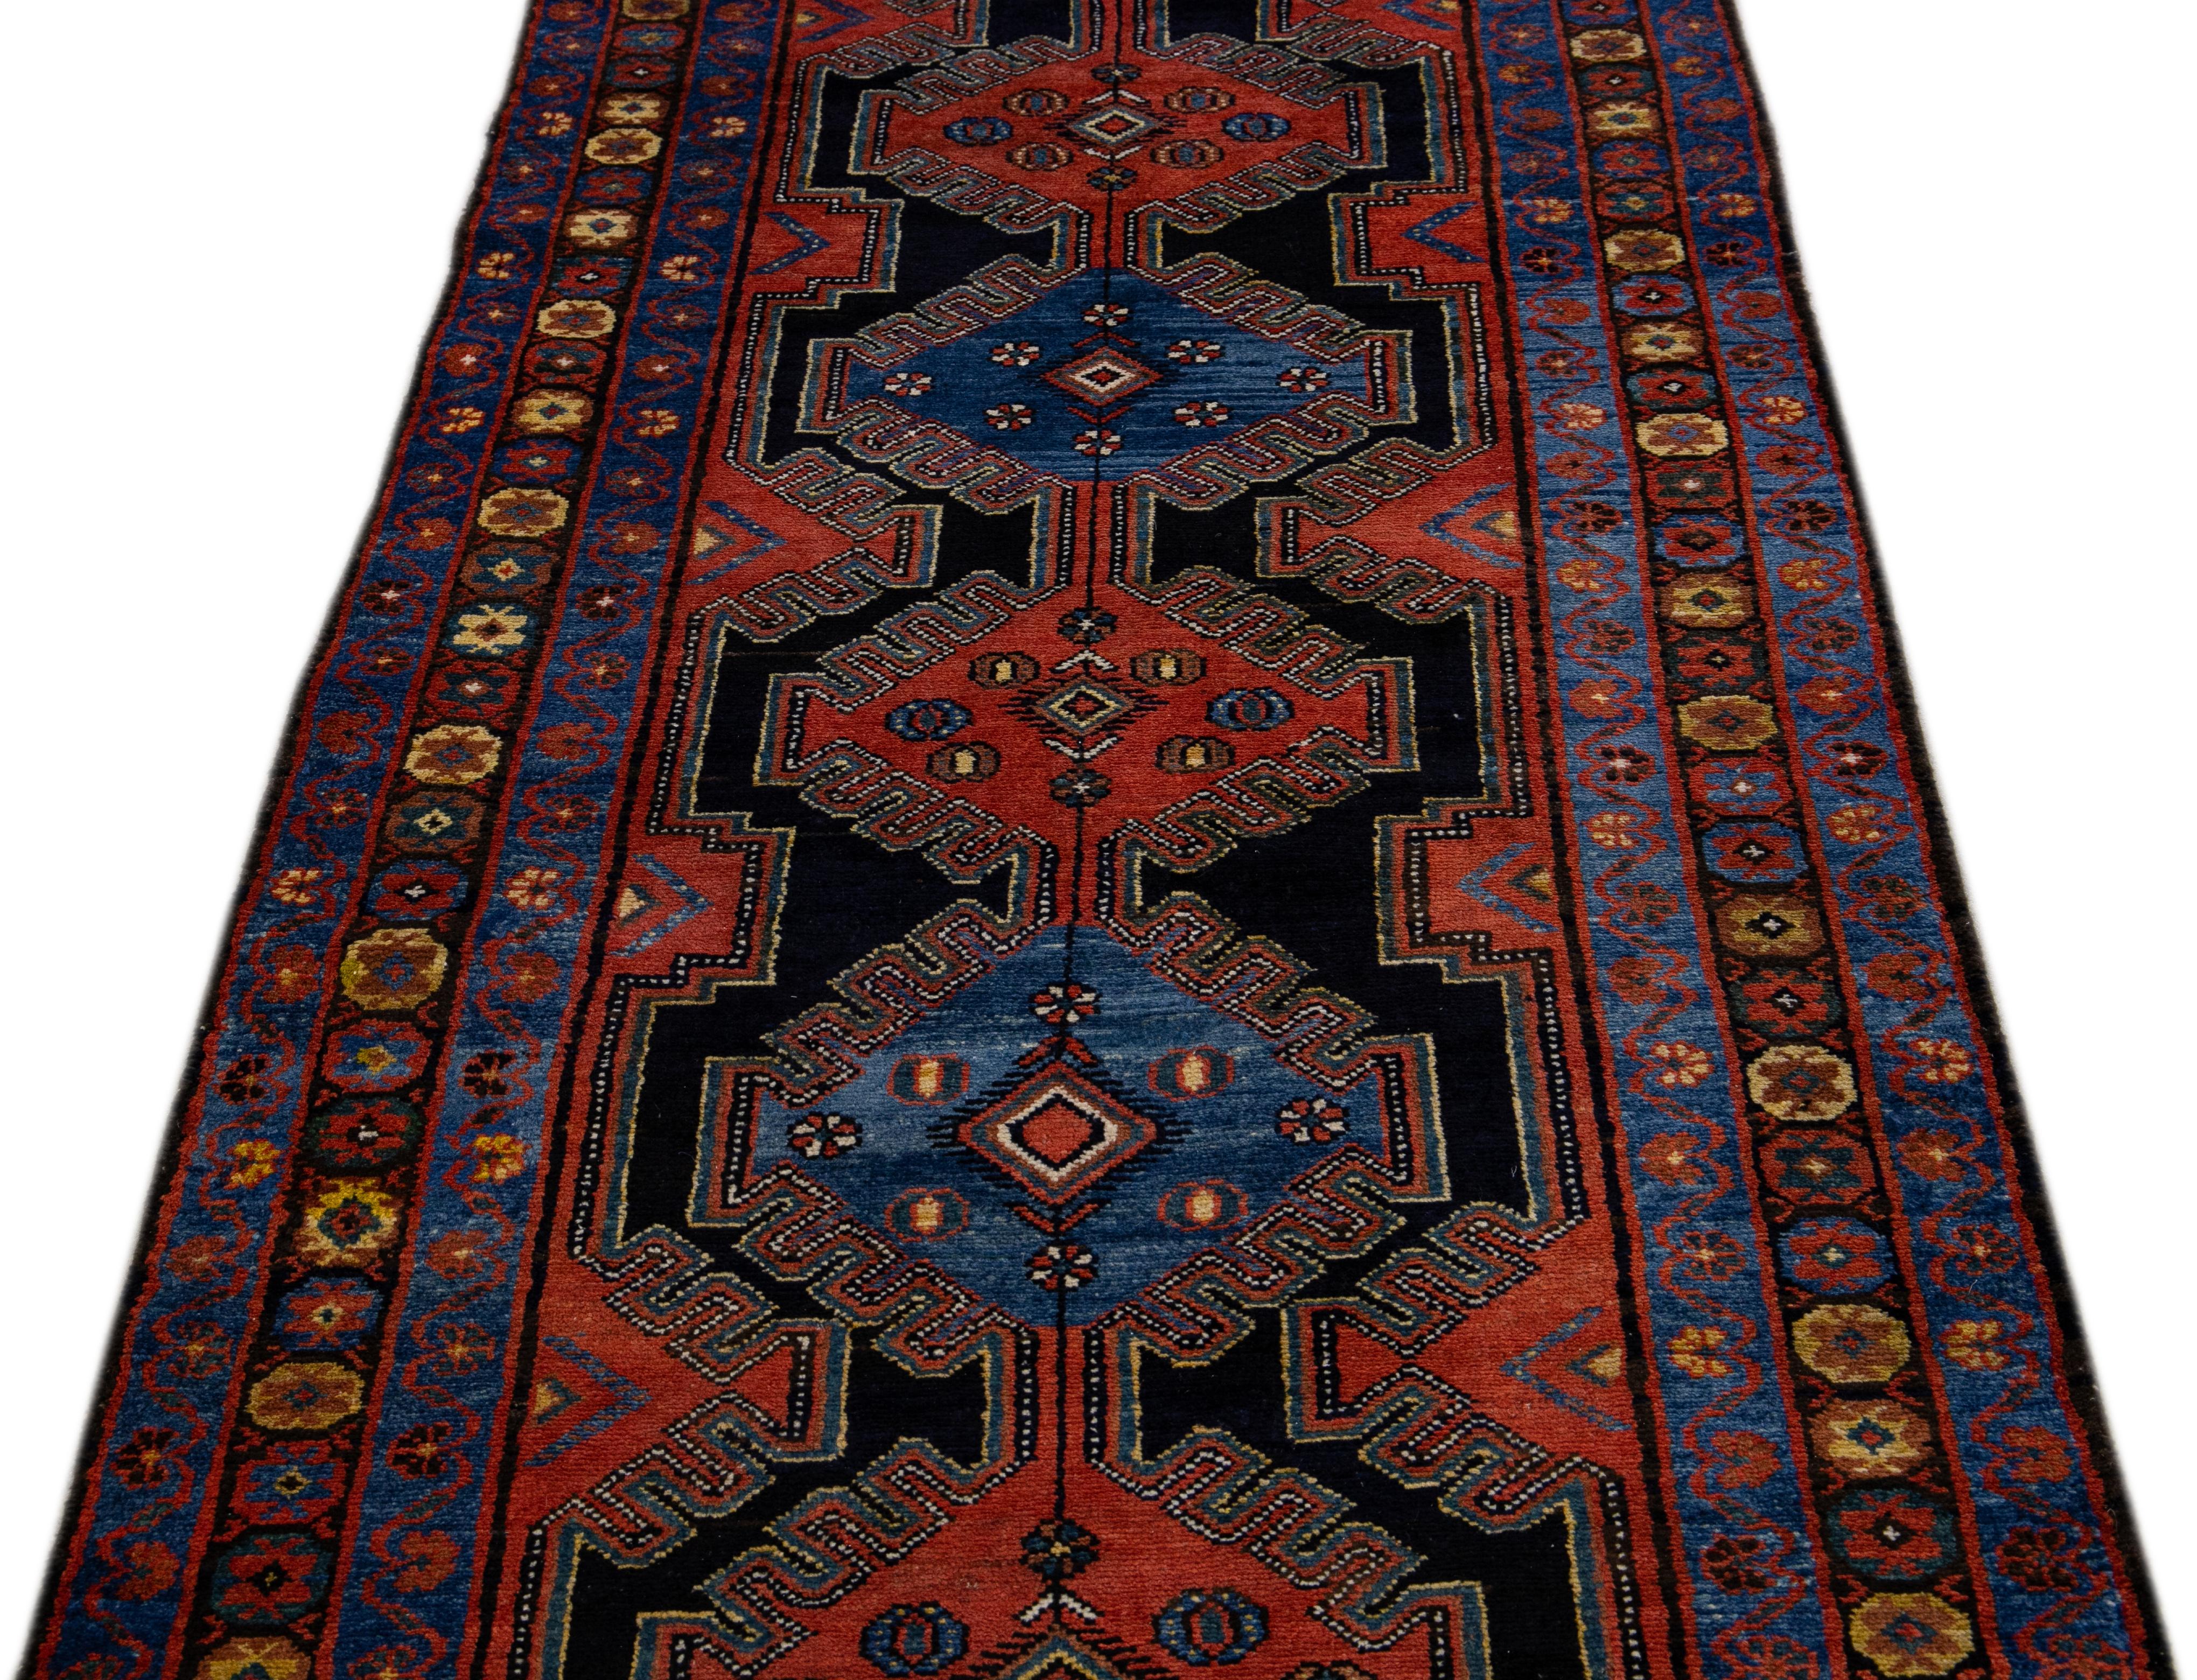 Beautiful antique Malayer hand-knotted wool runner with the dark ink-blue field. This Persian piece features a wide double border in alternating blue and rust with some yellow accents in an all-over tribal design. 

This runner measures 3'3